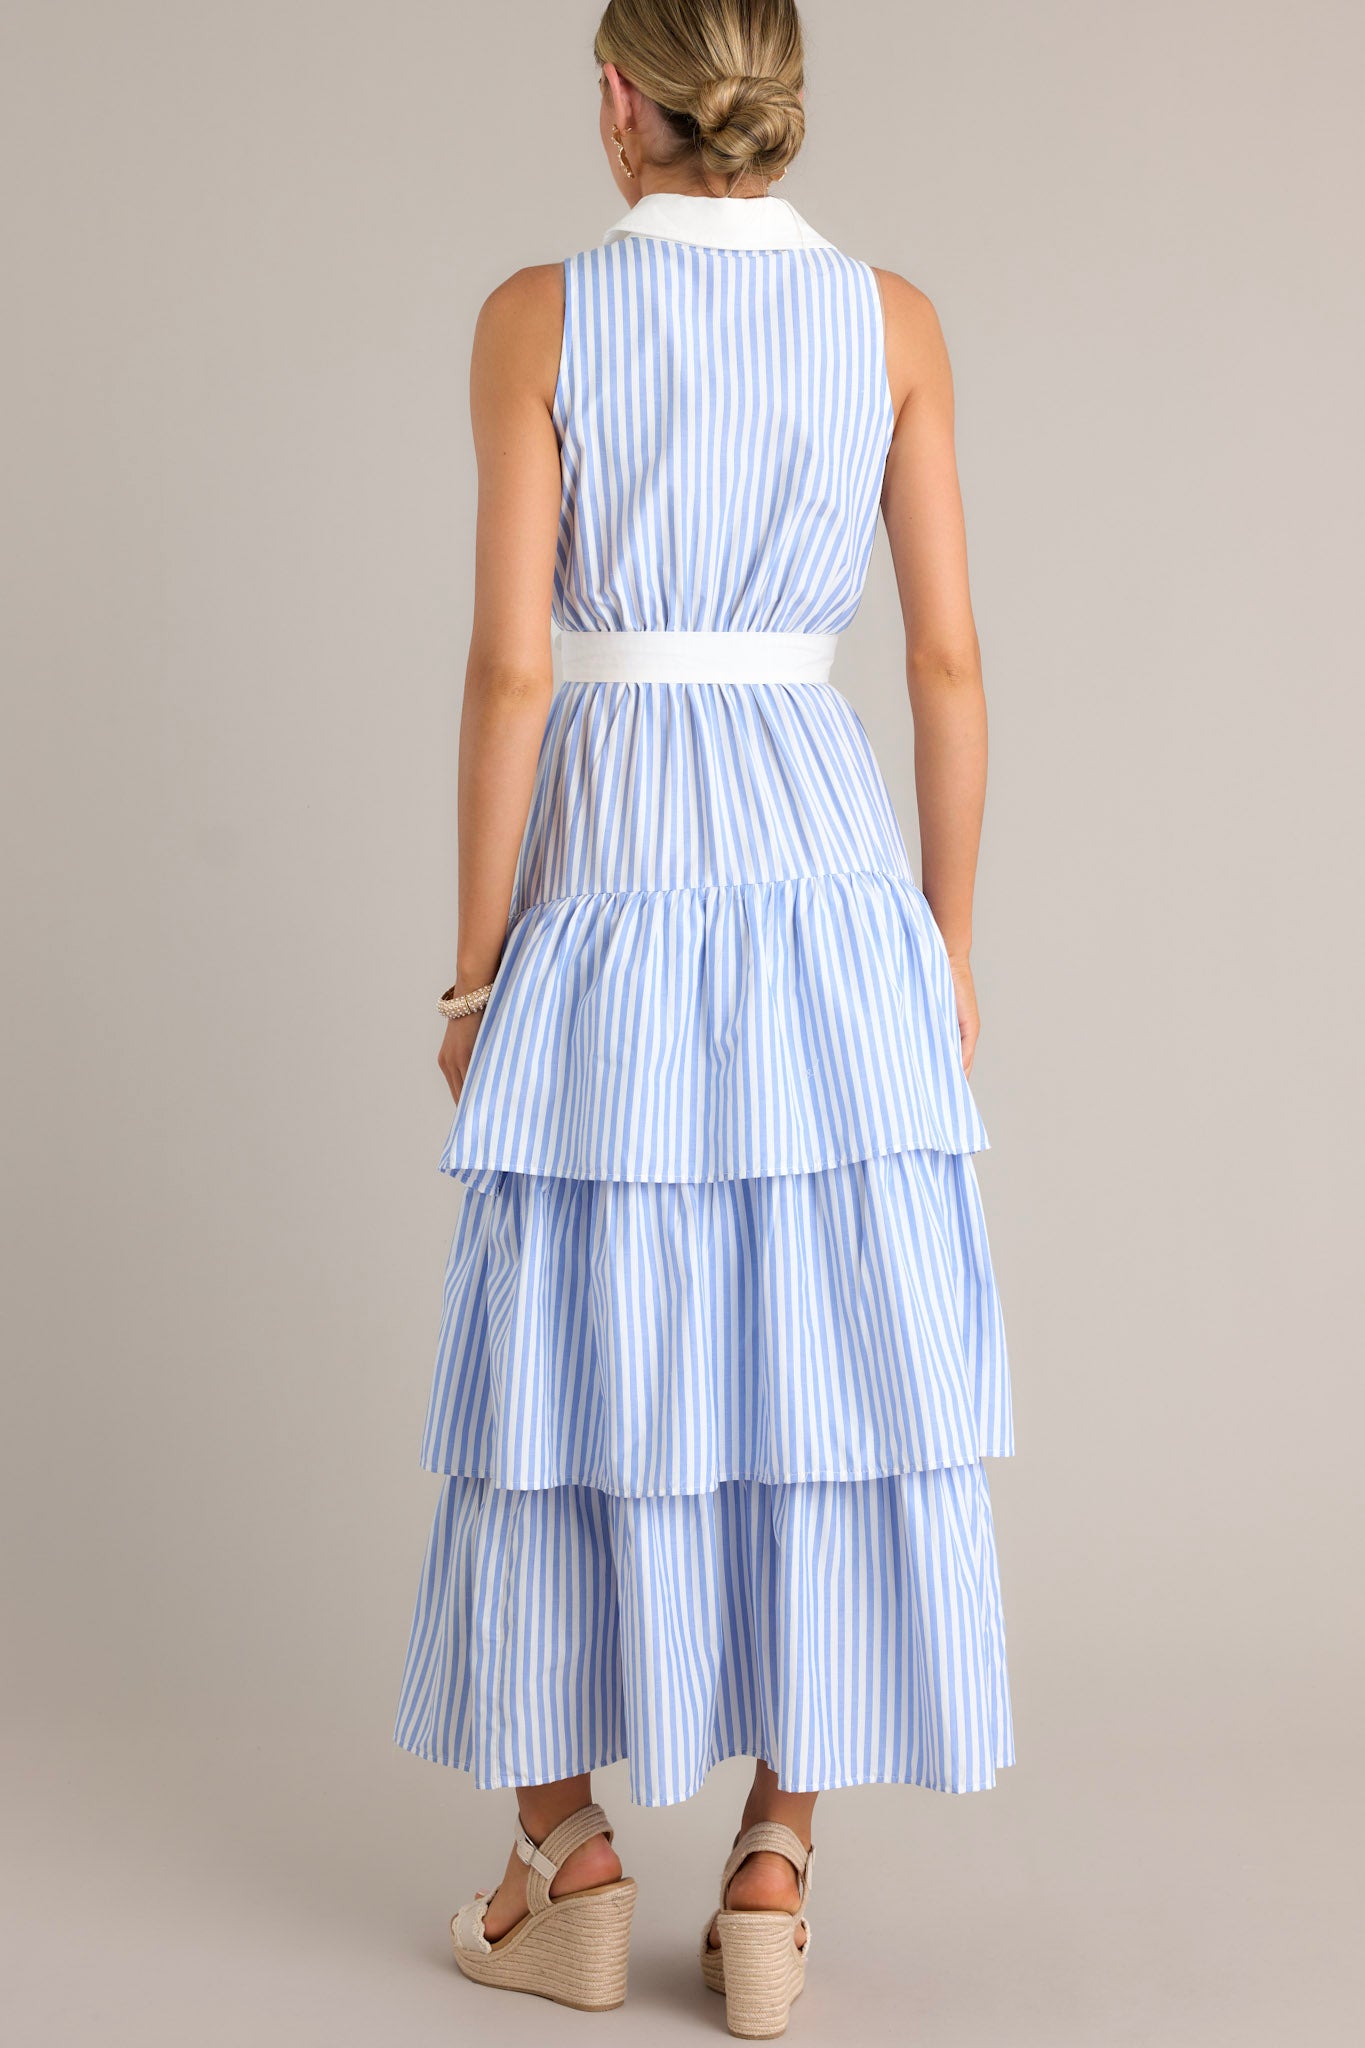 Back view of a blue stripe maxi dress highlighting the collared neckline, elastic waist insert, and the multiple tiers.